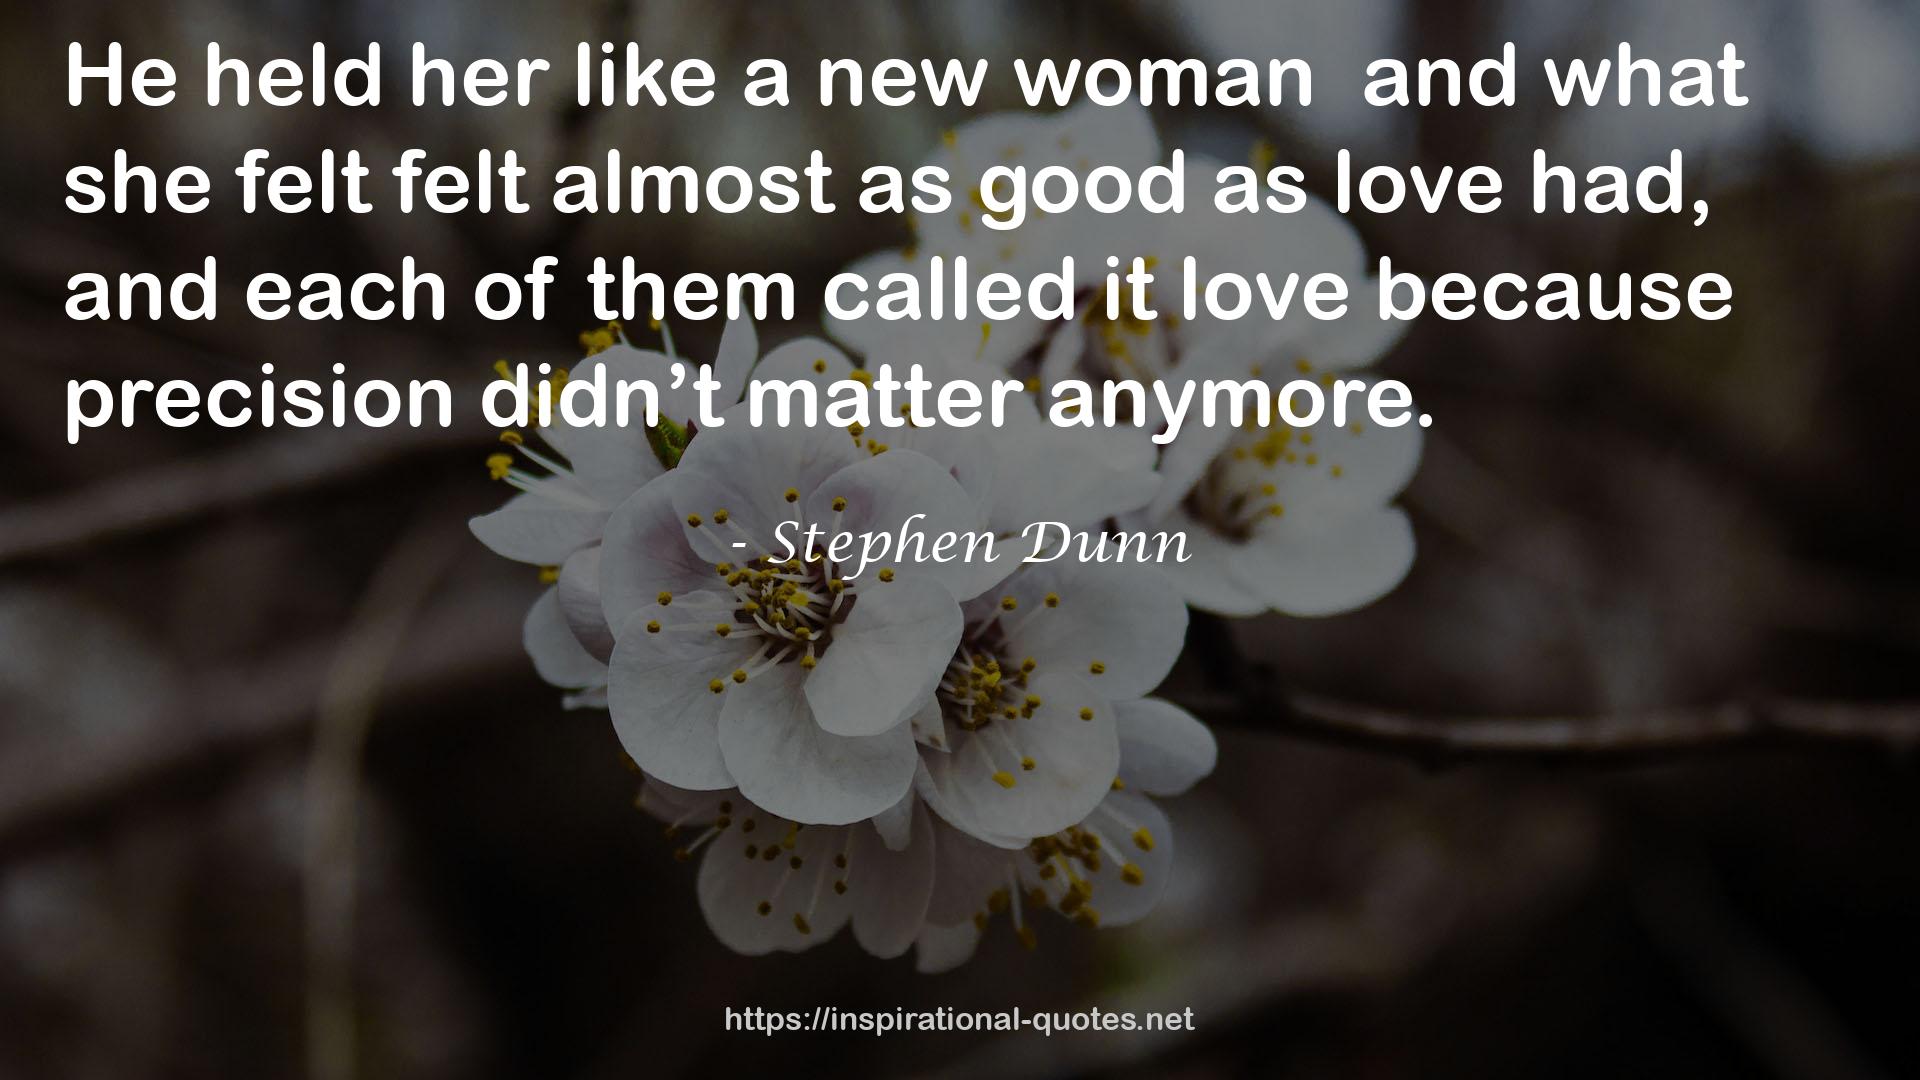 Stephen Dunn QUOTES